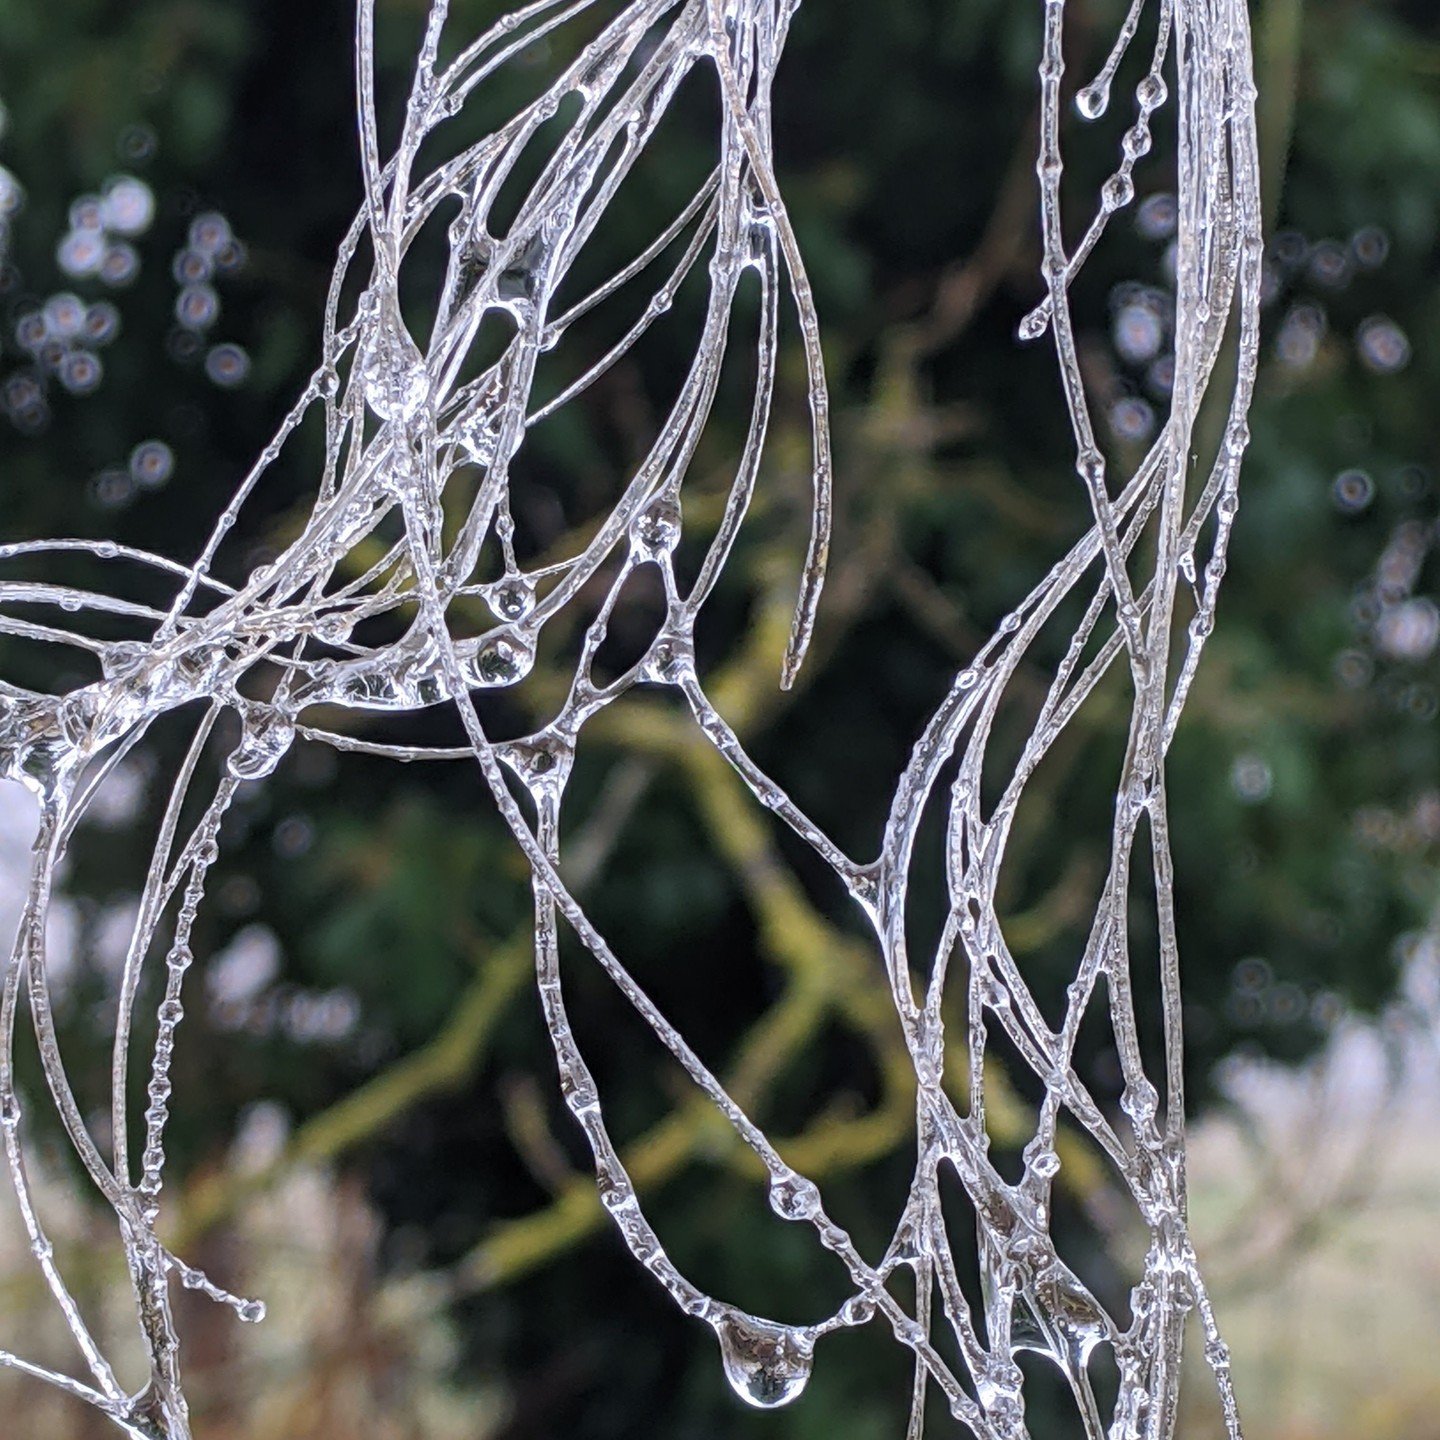 ✨Reposting Me! Deliciously drippy, frozen tendrils. 

🌕These photos were the inspiration for that last moonstone pendant (see previous post). 

😷 Taken in the long, crazy winter of 2020 during one of my many wanderings in #FulbournFen

❄️It took me